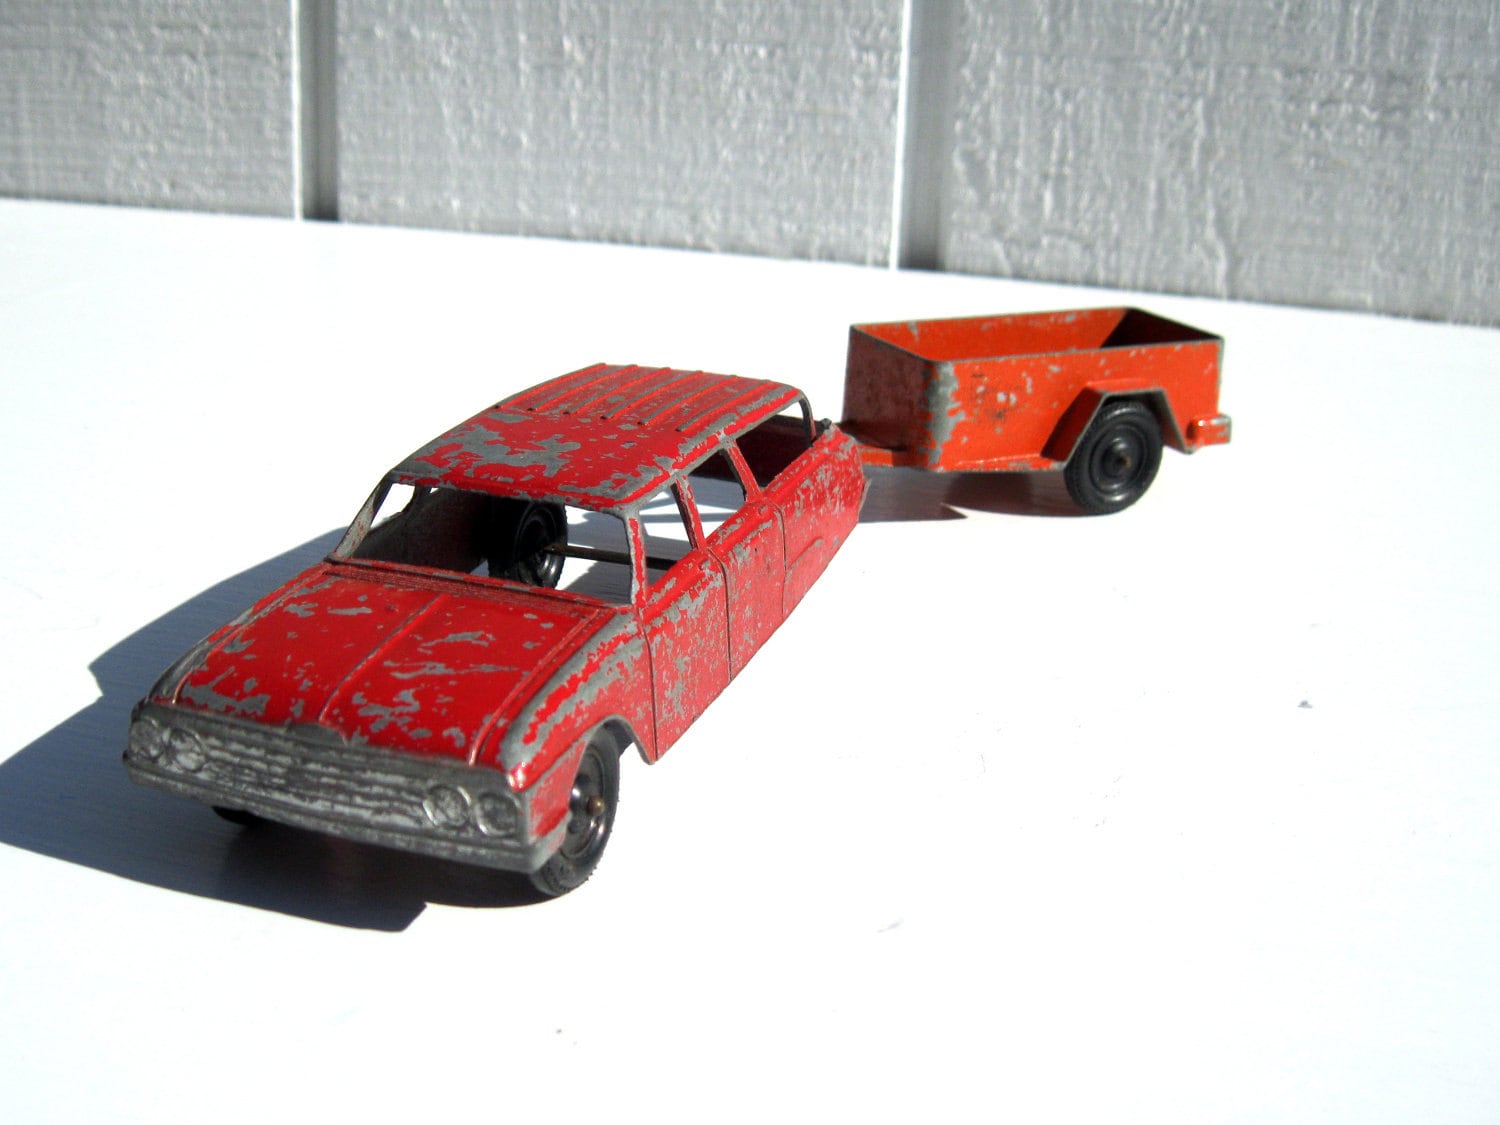 QUOT;ANTIQUE METAL TOY CARS IN TOYSQUOT; TOYS PRODUCT REVIEWS AND PRICES